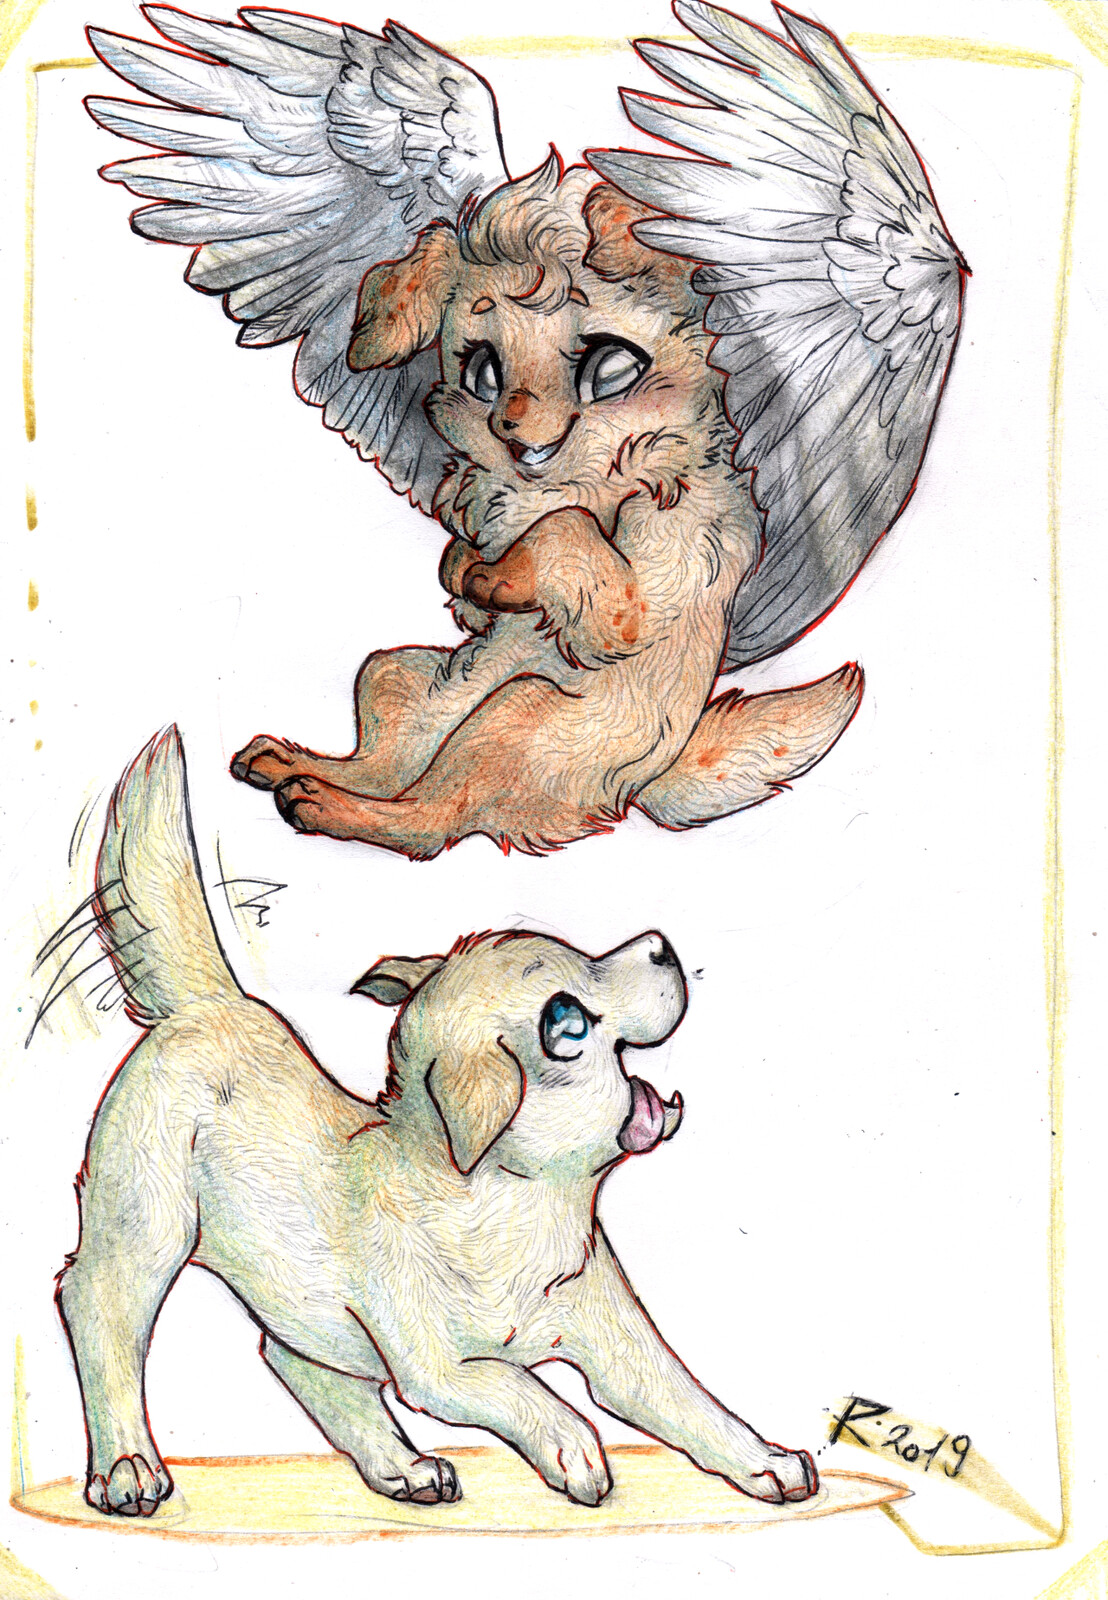 Another ArtFight attack, or better a revenge! Two adorable puppies &lt;3 Muddpaws's Aspen (the flying dog) with our labrador-were mix Asdrubale. Drawn with colored pencils and pen. 